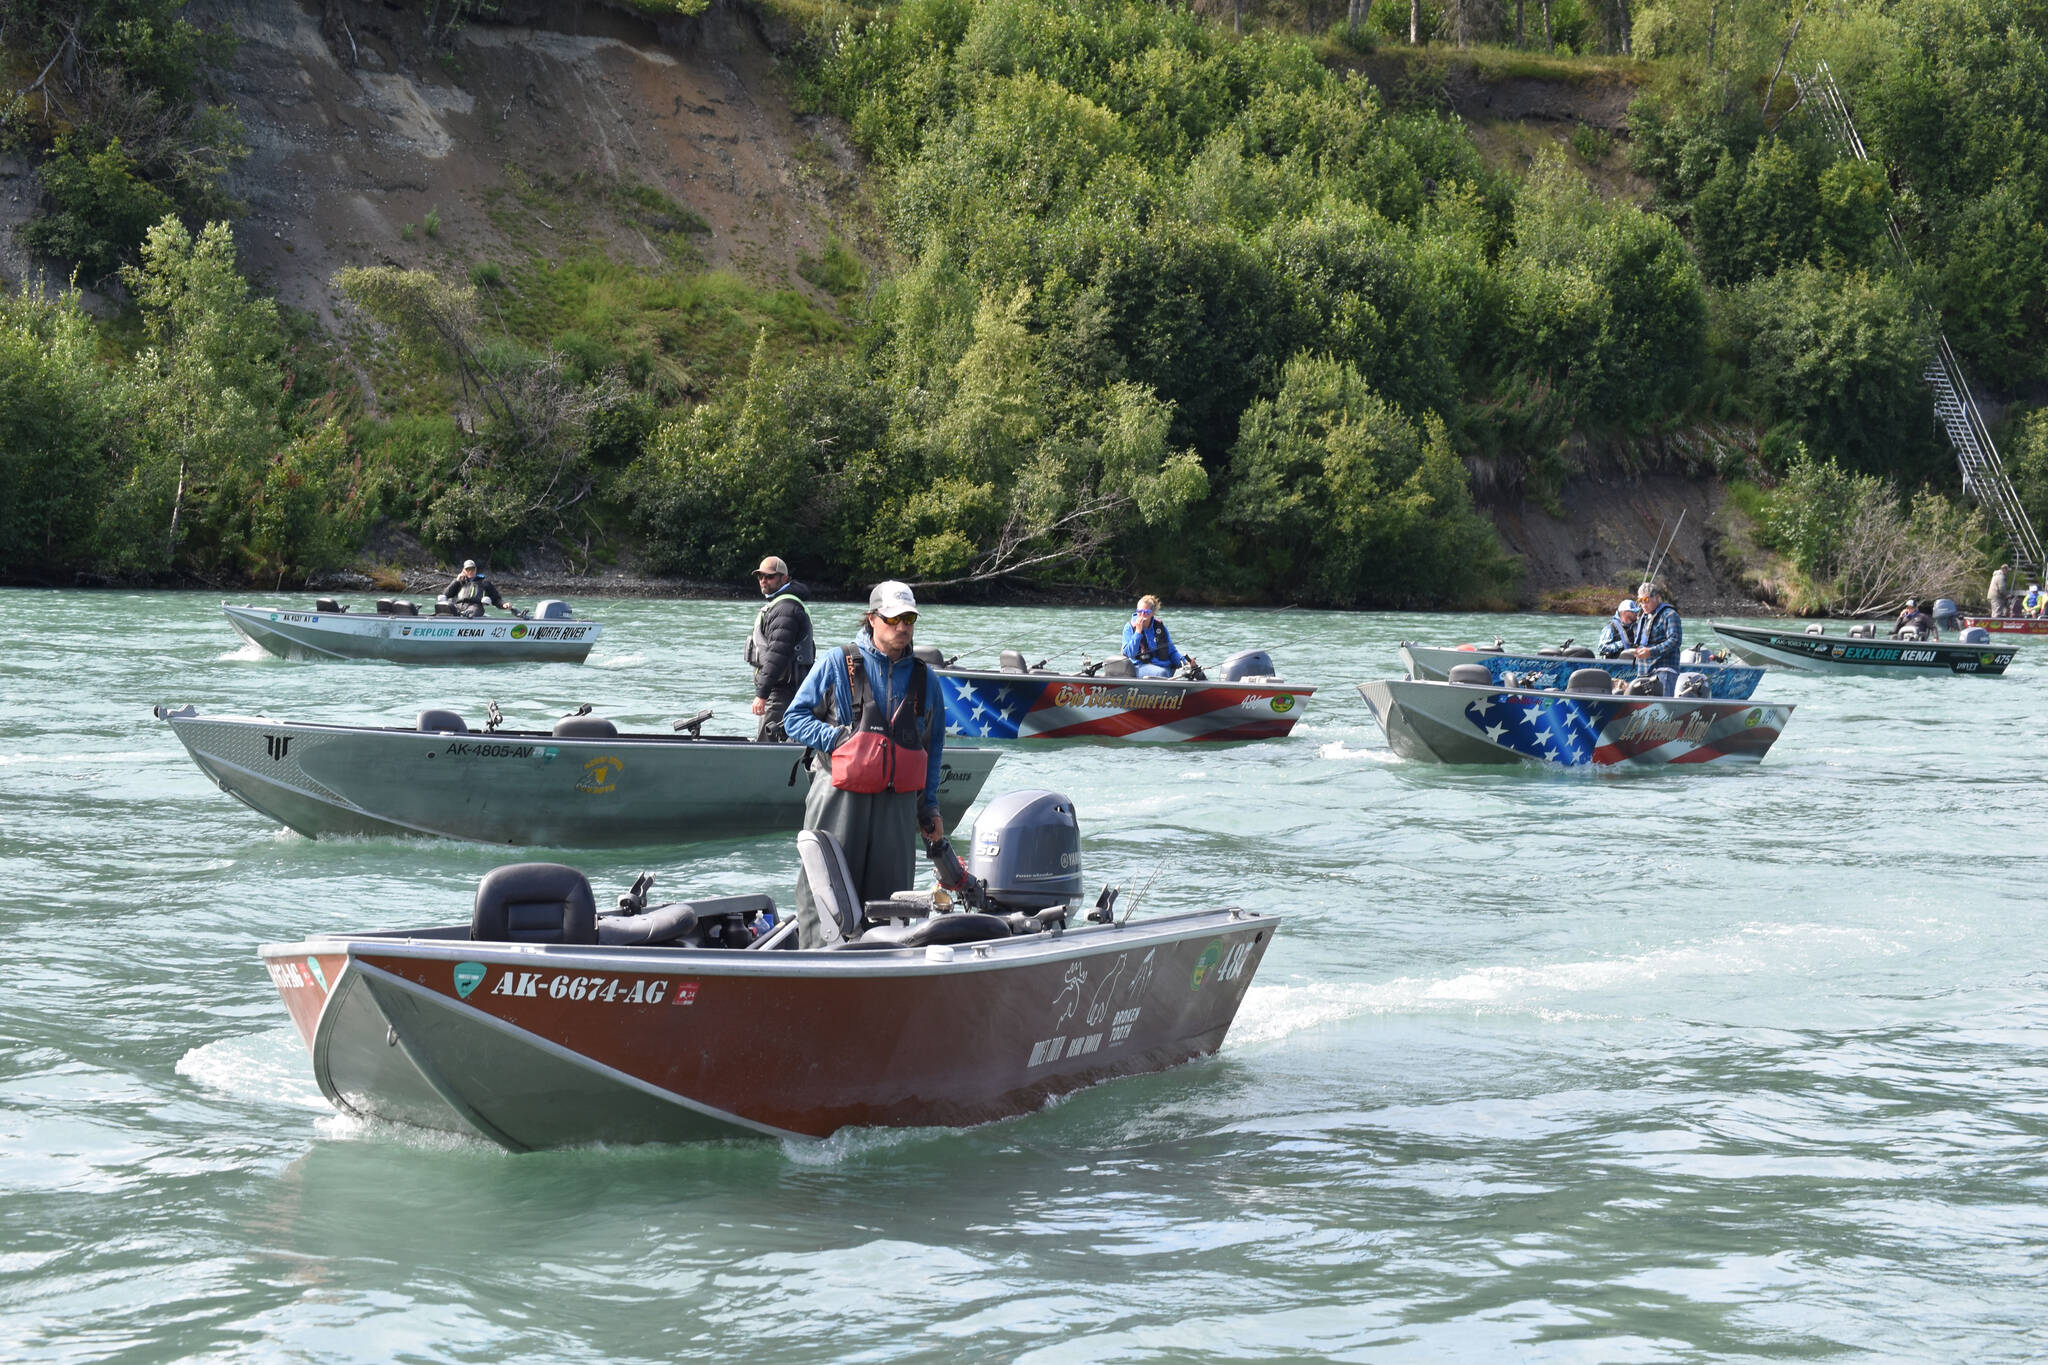 Boats are staged to pick up children at the Kenai River Junior Classic in Soldotna, Alaska, on Aug. 10, 2022. 25 boats picked up more than 90 kids. (Jake Dye/Peninsula Clarion)